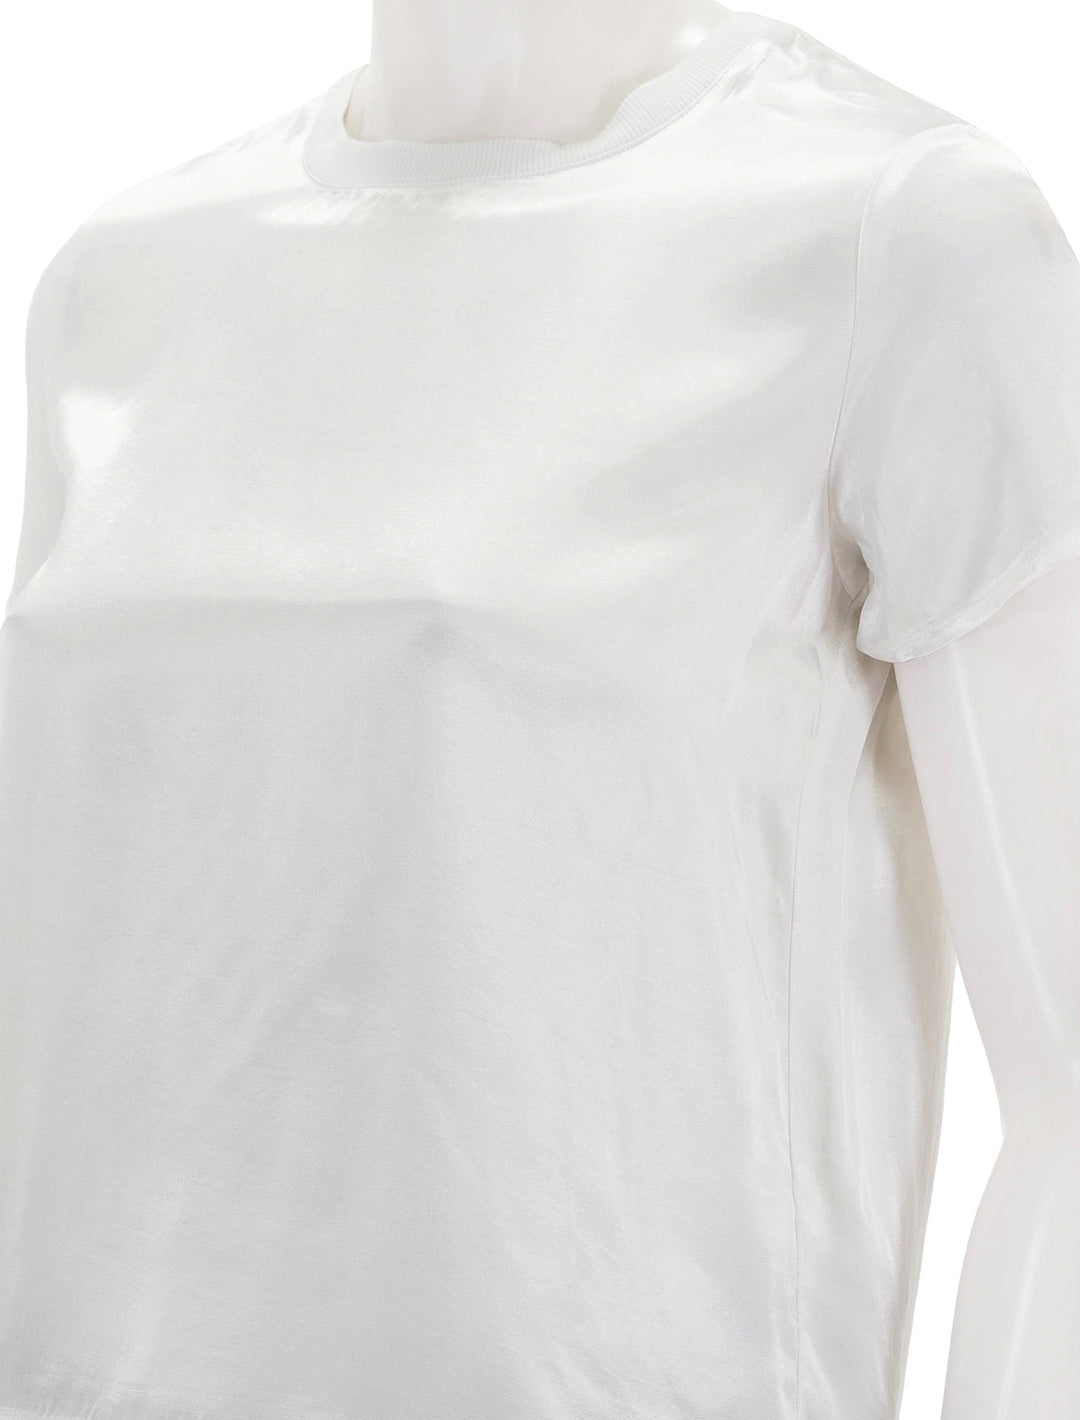 Close-up view of Nation LTD's marie top in white sateen.